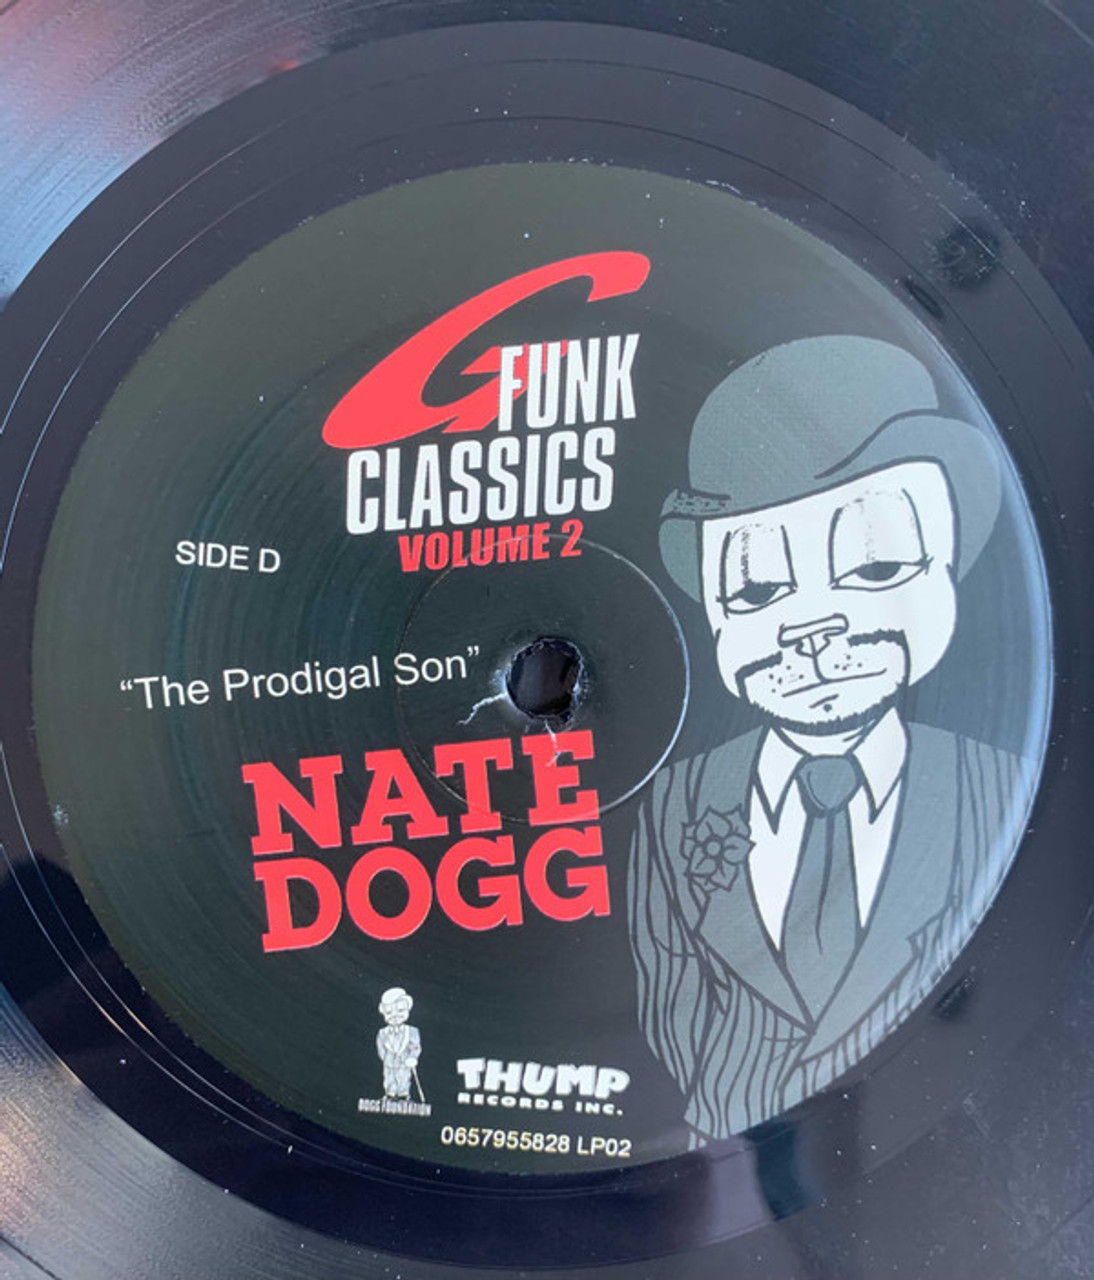 G FUNK CLASSICS VOLUMES 1 AND 2 - NATE DOGG (#720657955828)